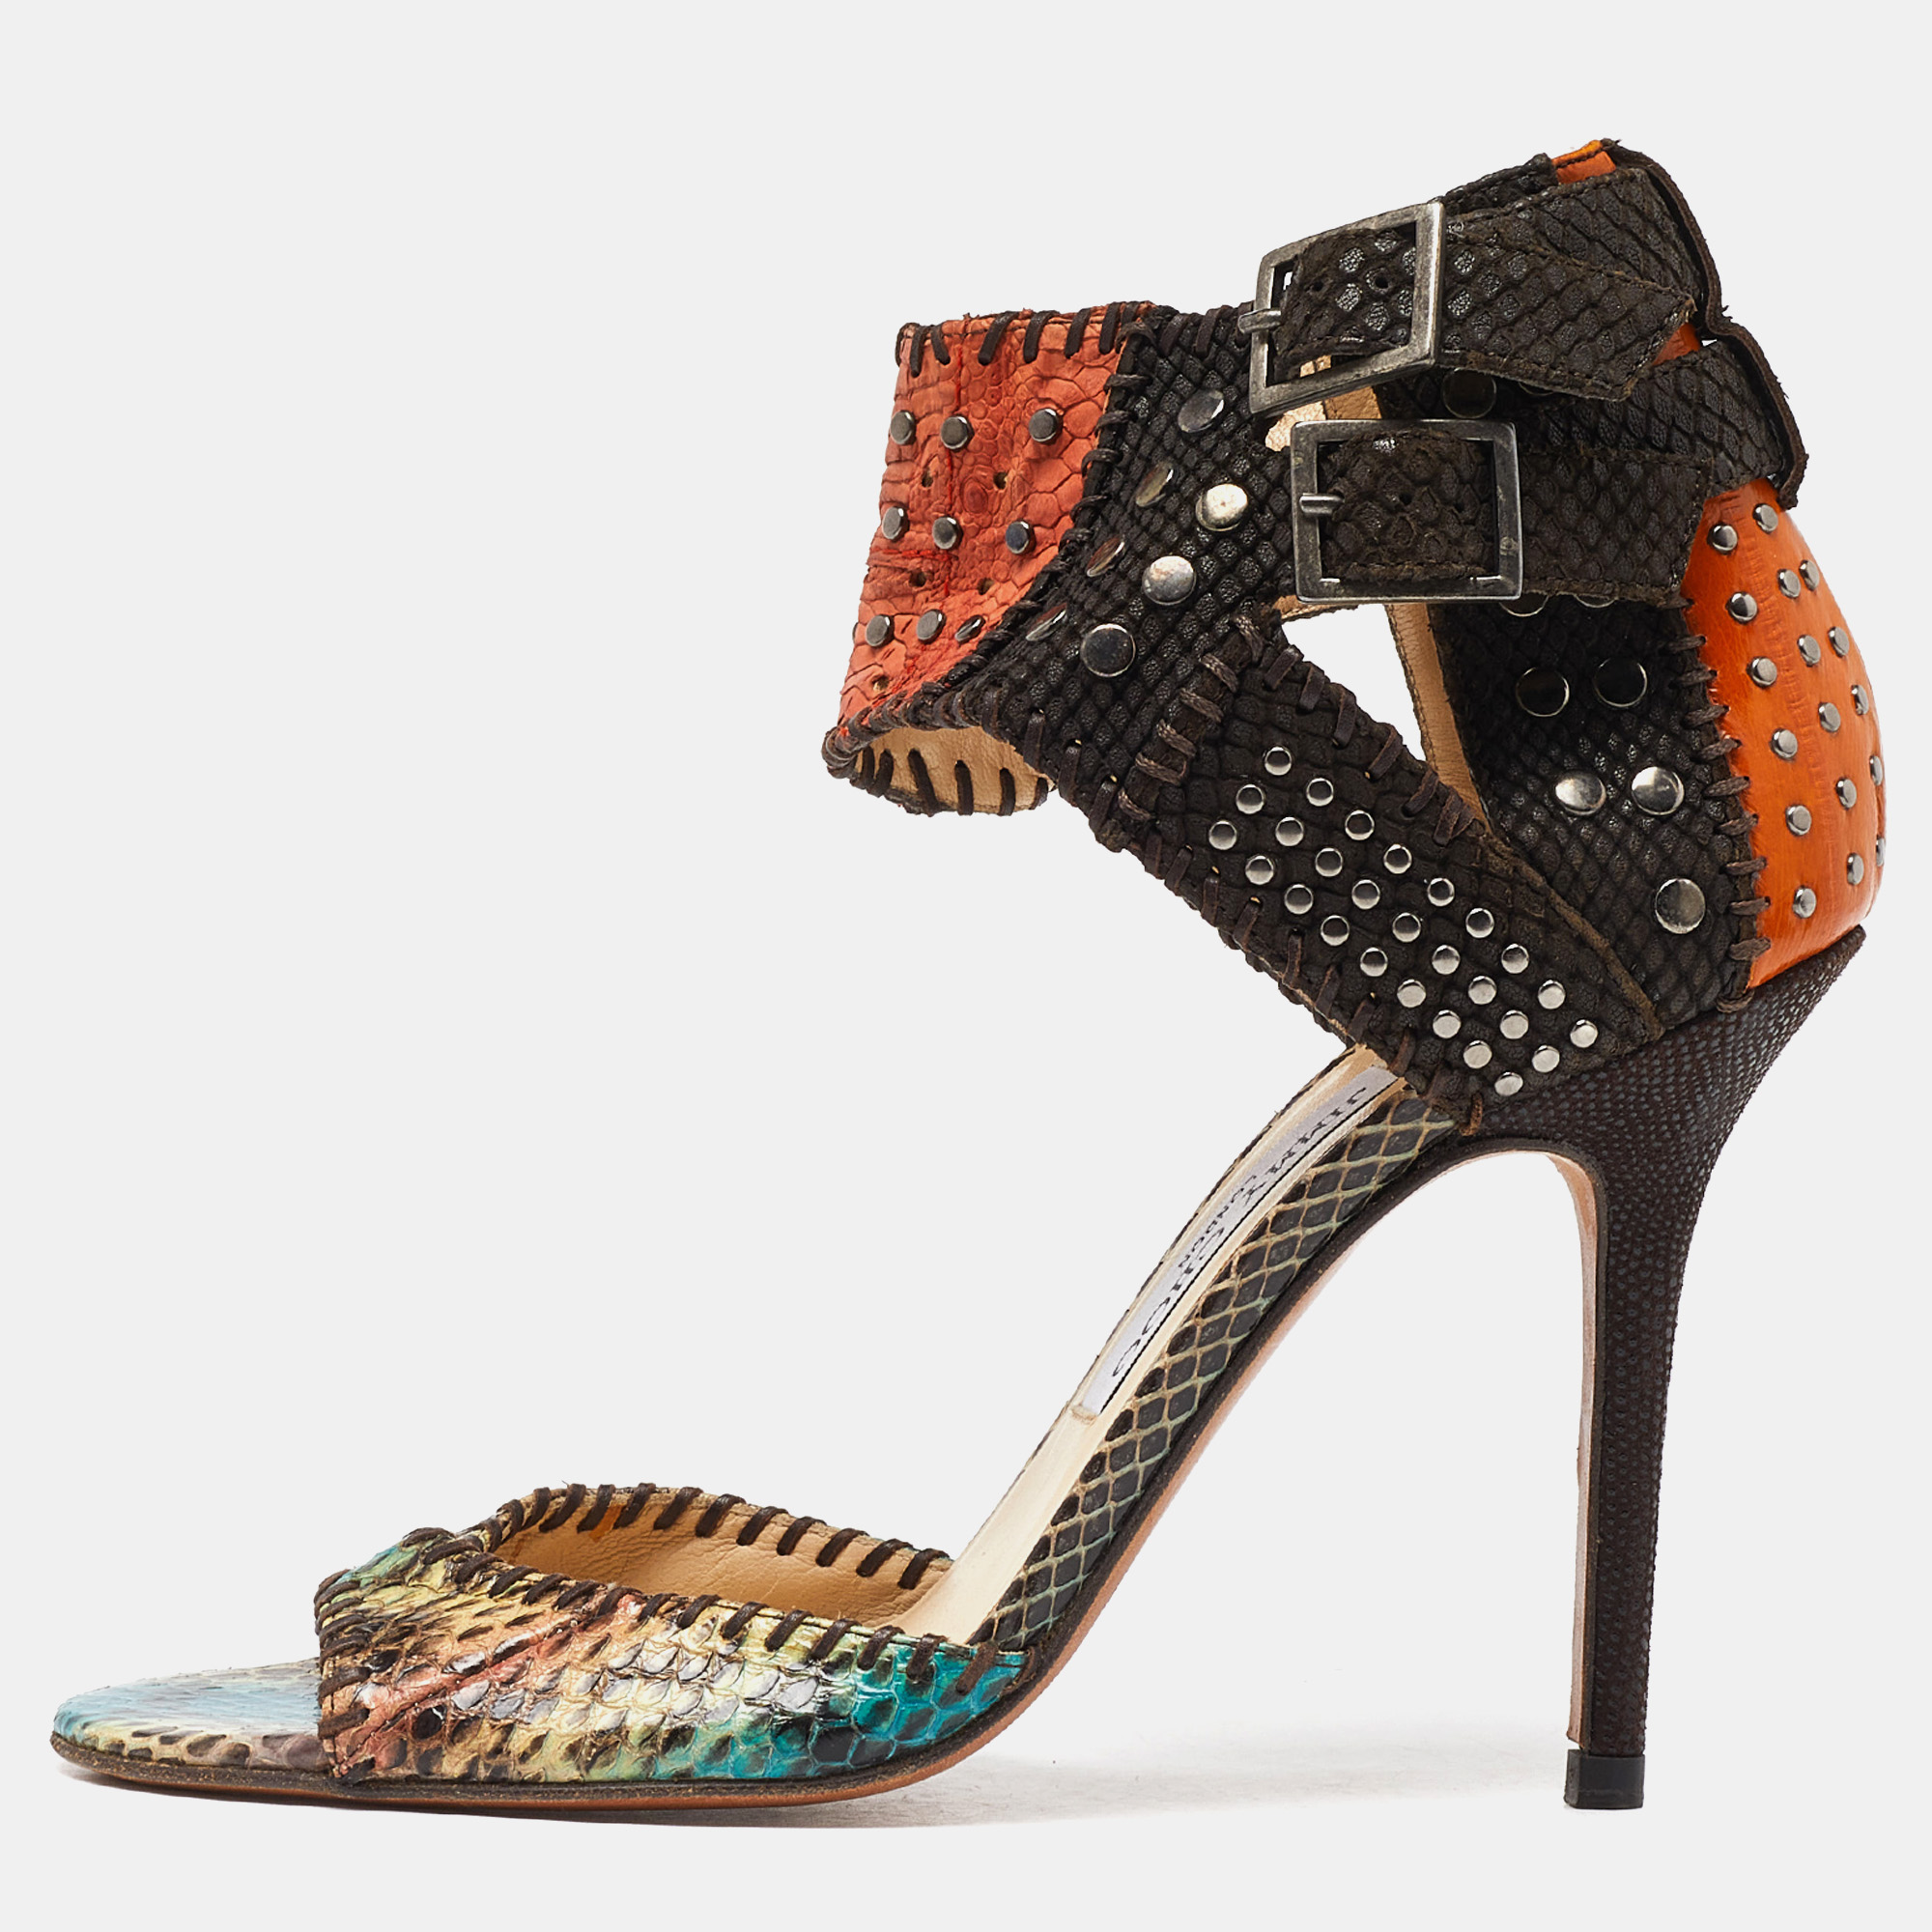 Jimmy choo multicolor python leather studded ankle cuff sandals size 39